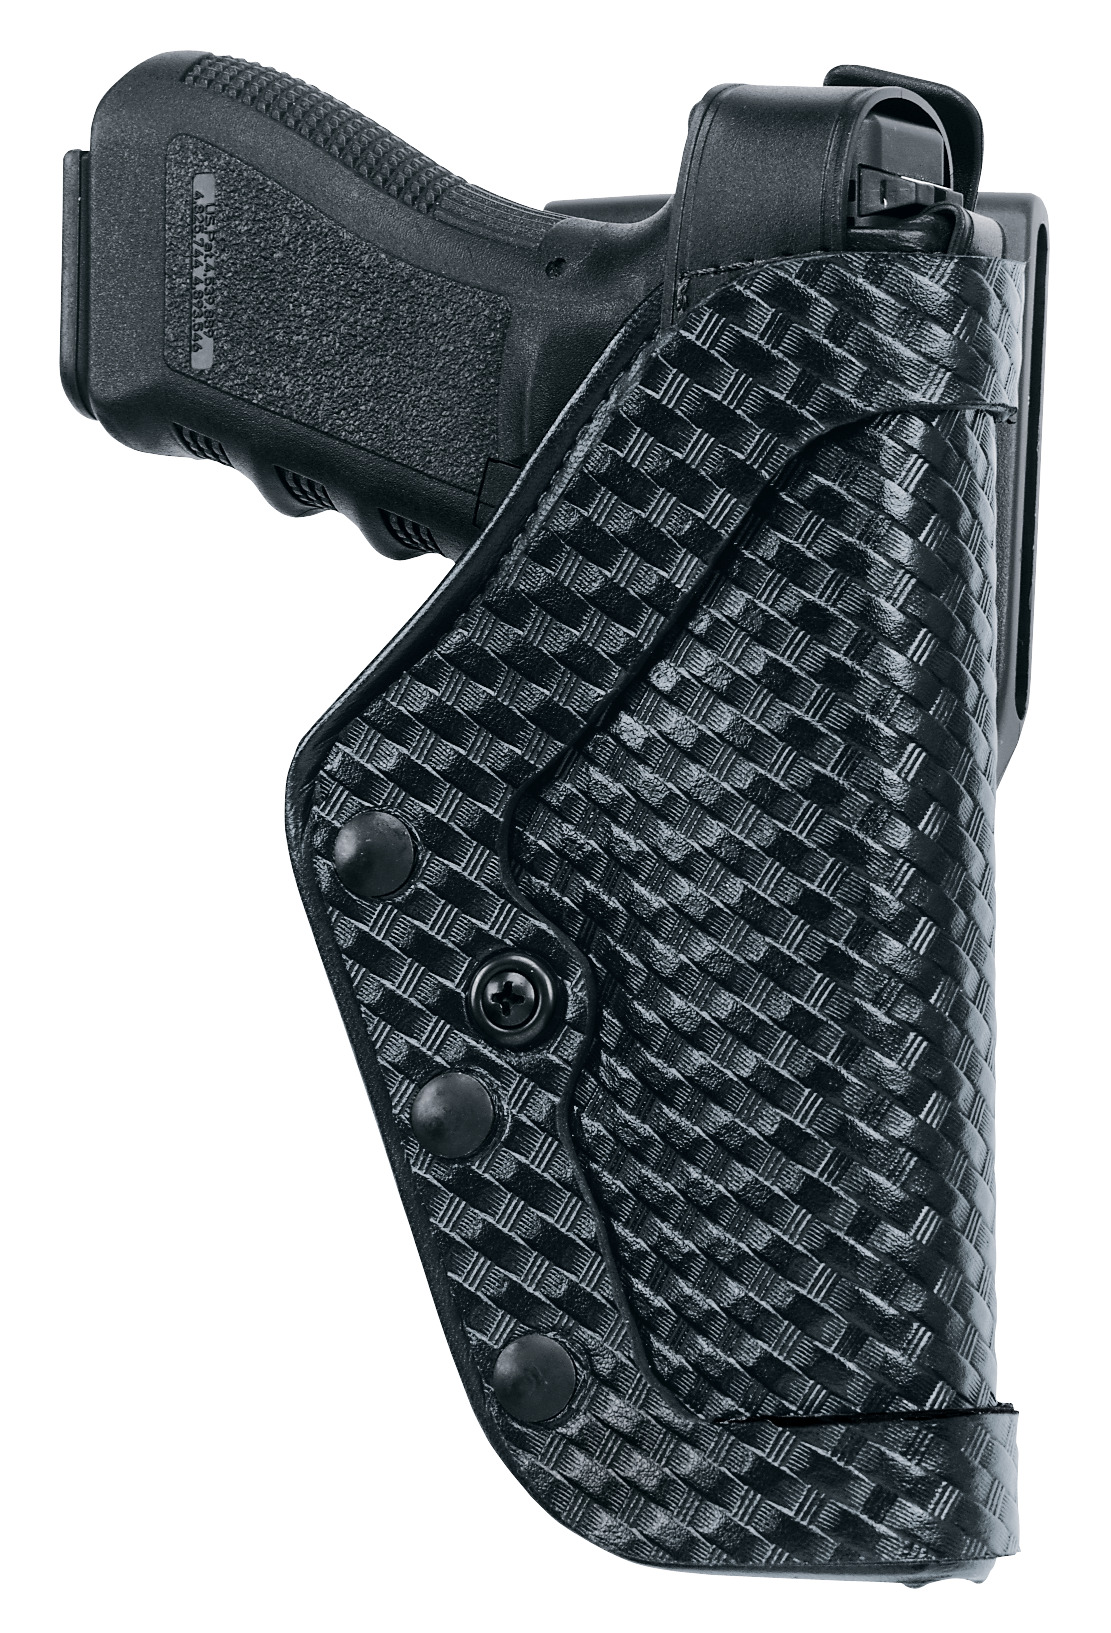 NEW Uncle Mikes Dual Retention Duty Holster R/H for 3-4" Revolvers 310R 